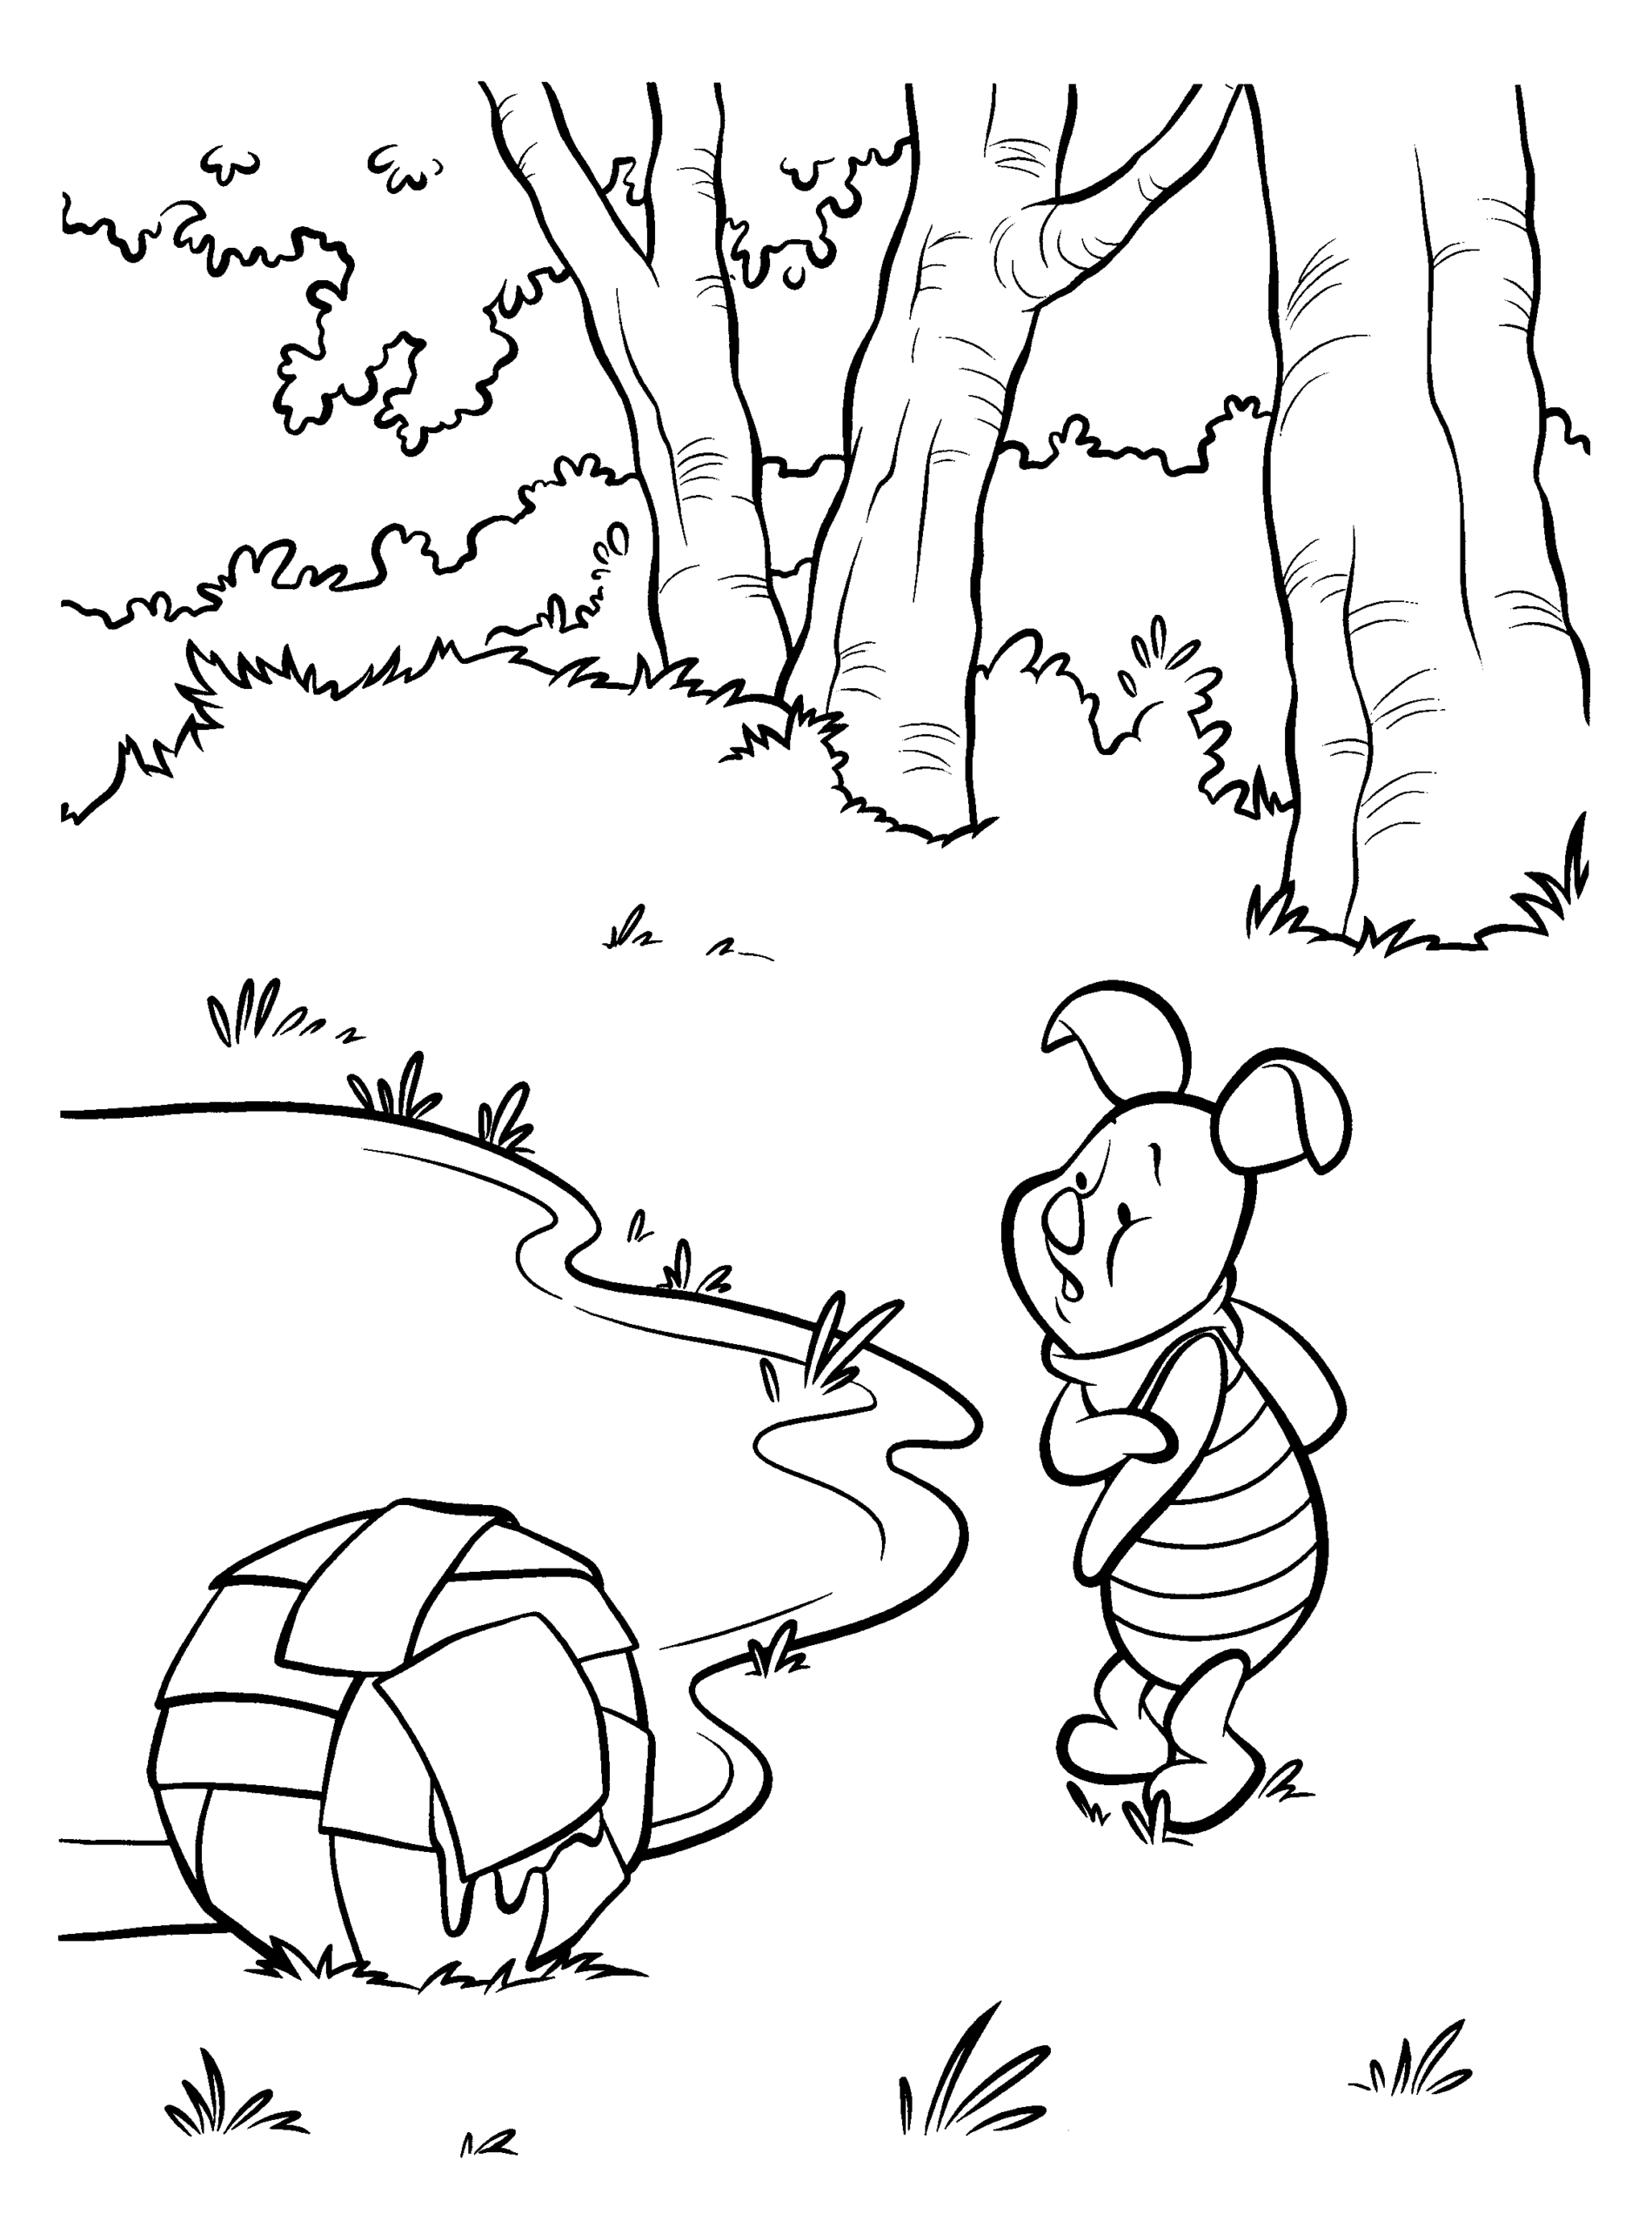 Winnie the Pooh Coloring Pages Cartoons winnie the pooh 27 Printable 2020 7128 Coloring4free